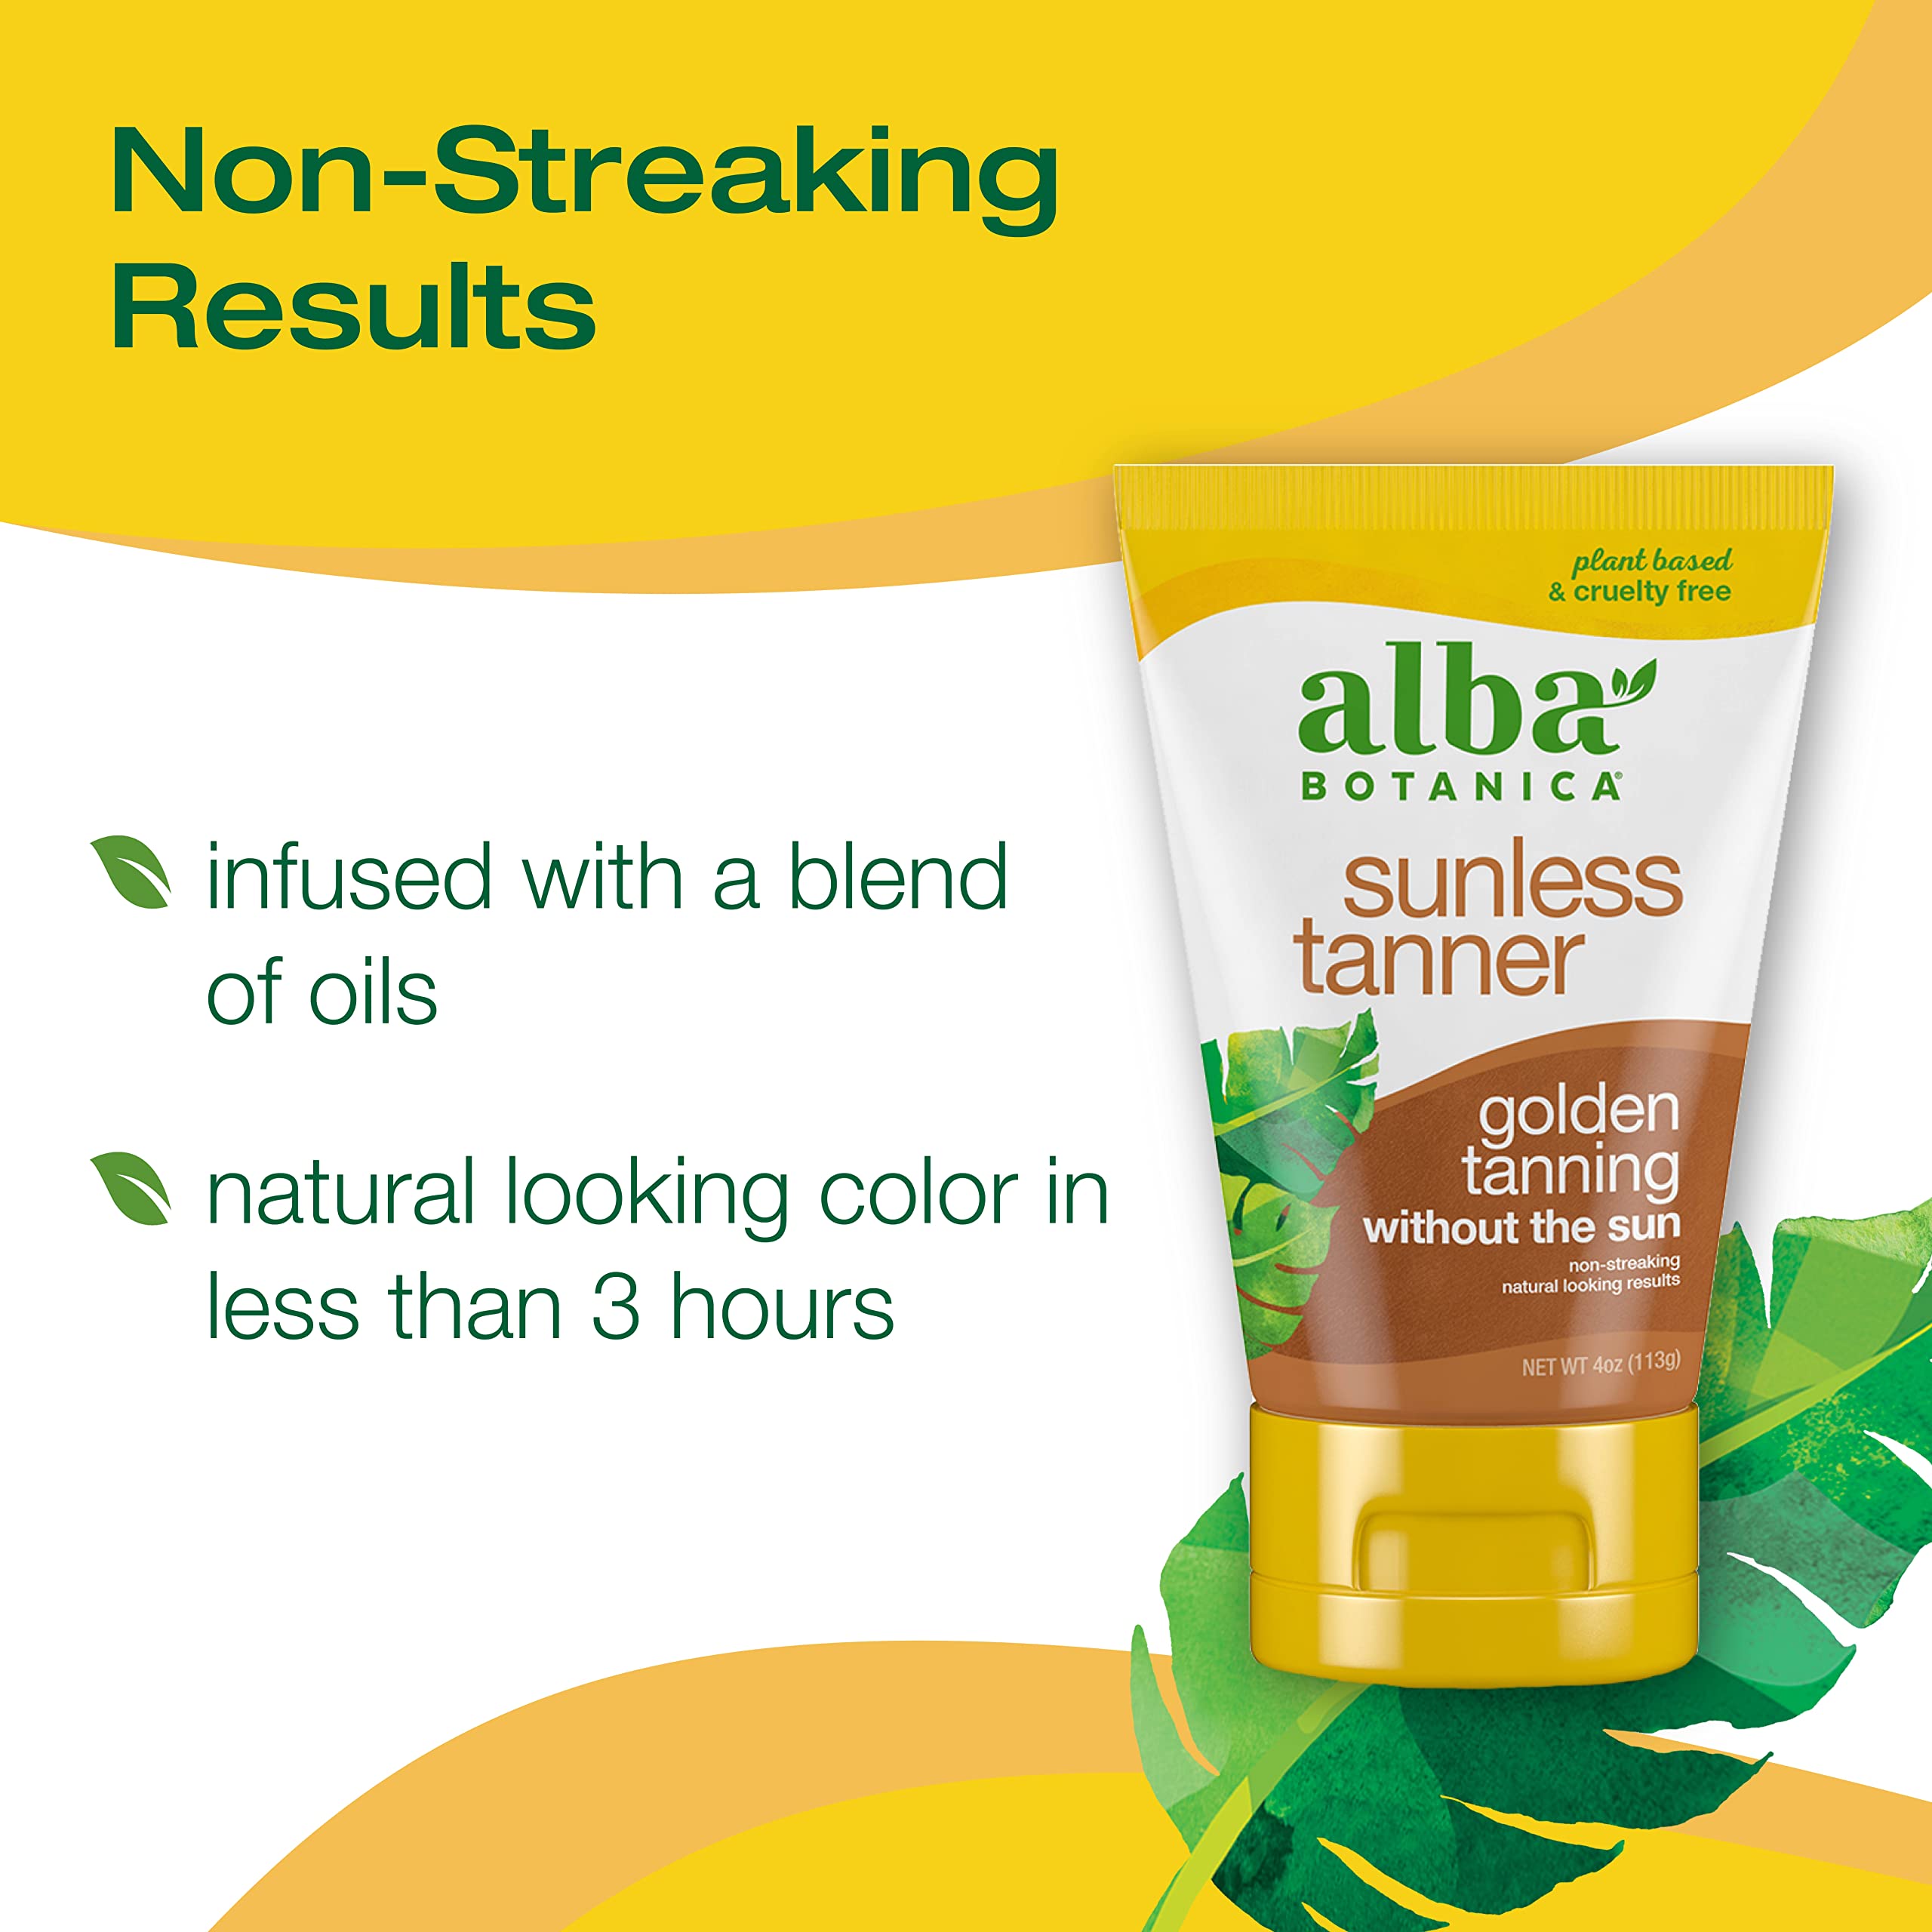 Alba Botanica Sunless Tanner, Self-Tanning Lotion for Face and Body, Golden Tanning without the Sun, Non-Streaking and Natural Looking Self-Tanner, 4 oz. Tube, (YELLOW,WHITE color)